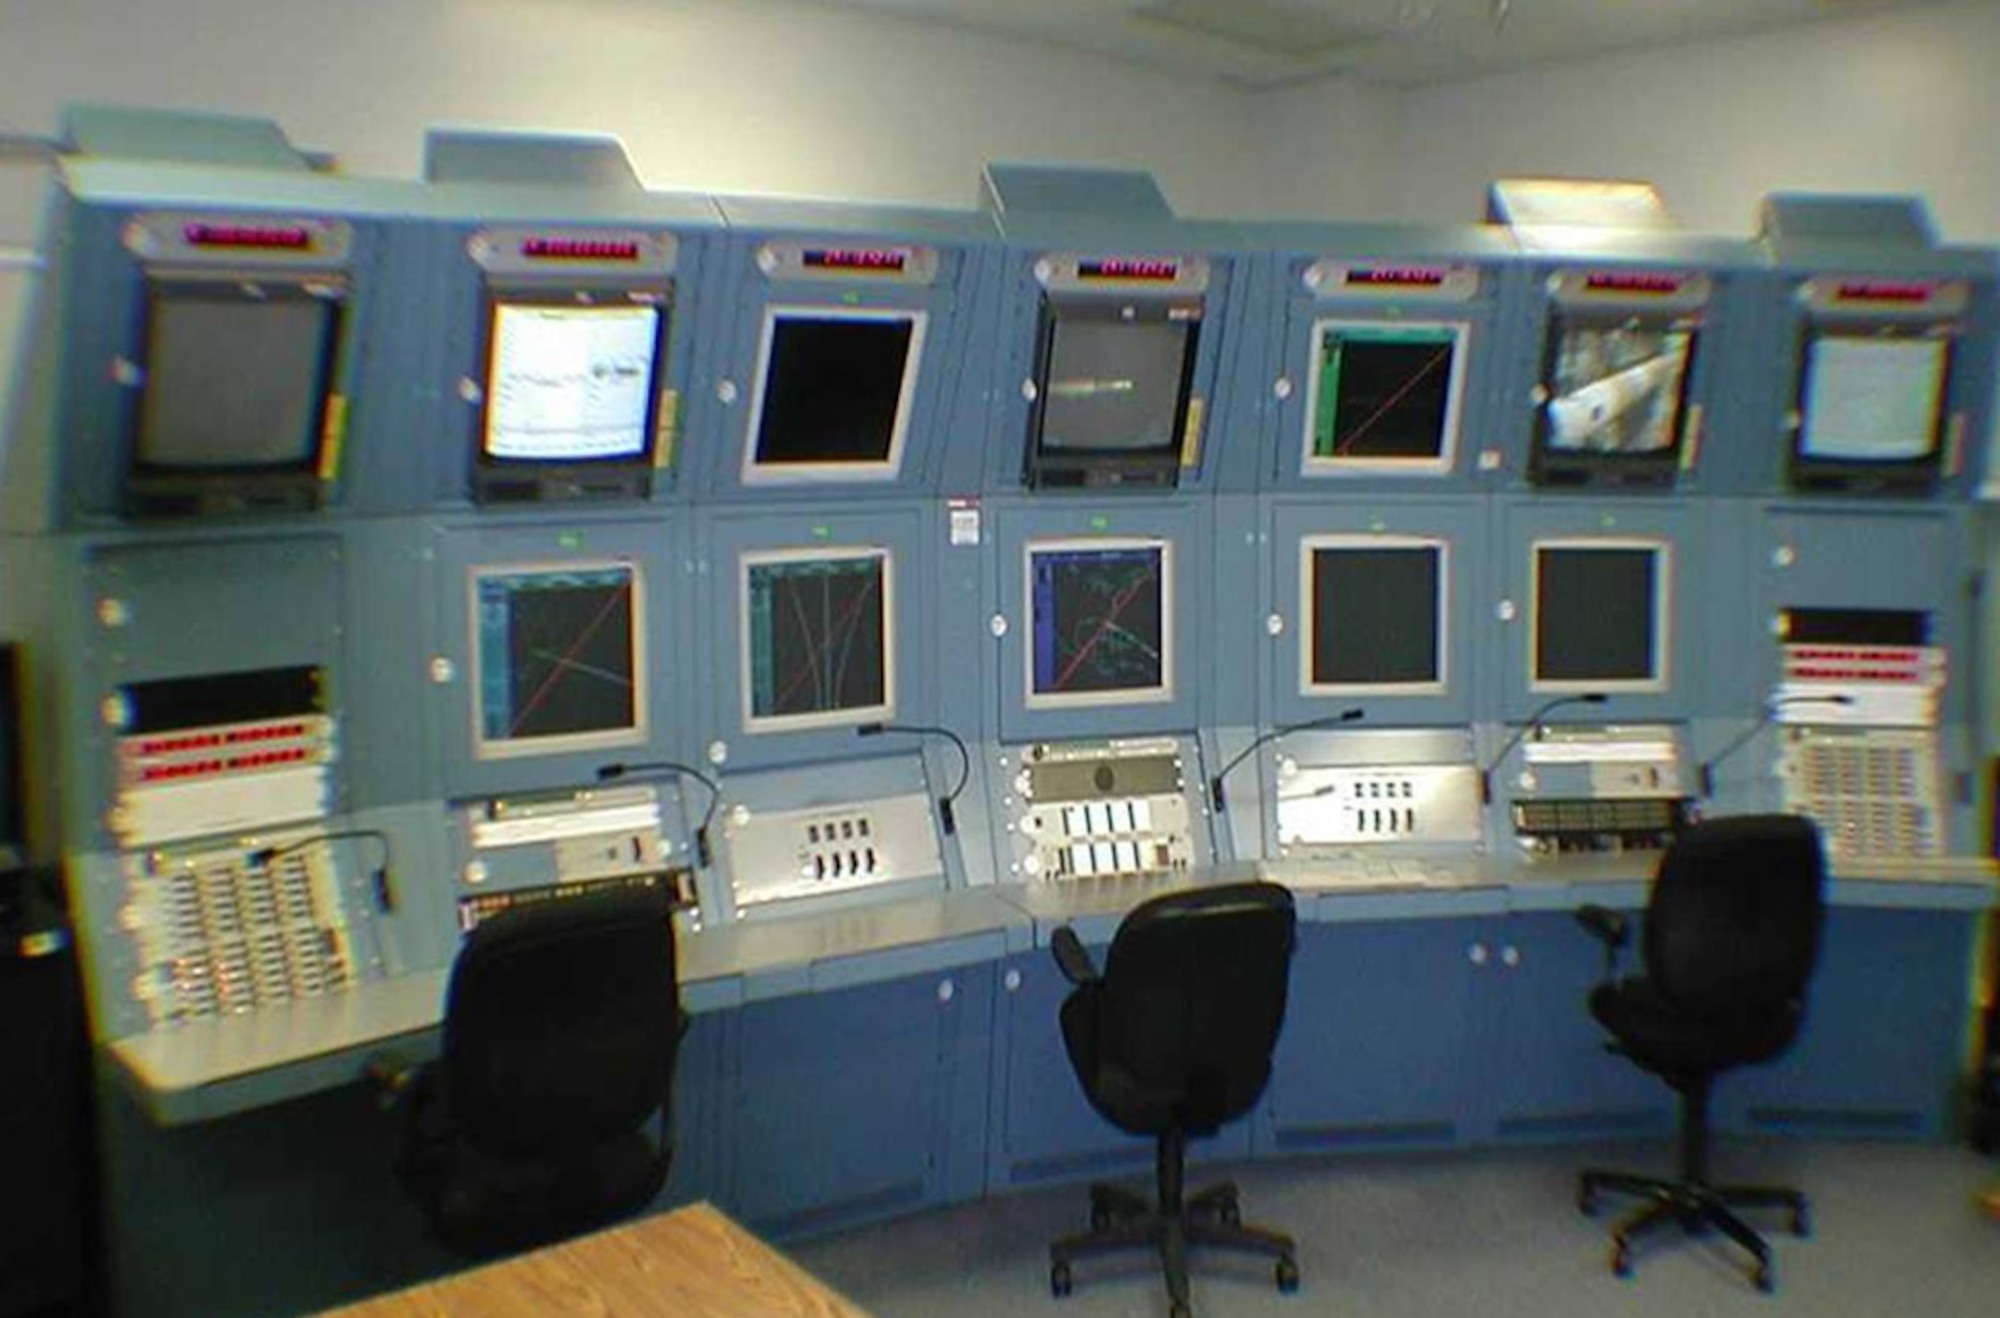 The Mission Flight Control Center at Vandenberg AFB is part of the Launch and Test Range System managed by SMC. 